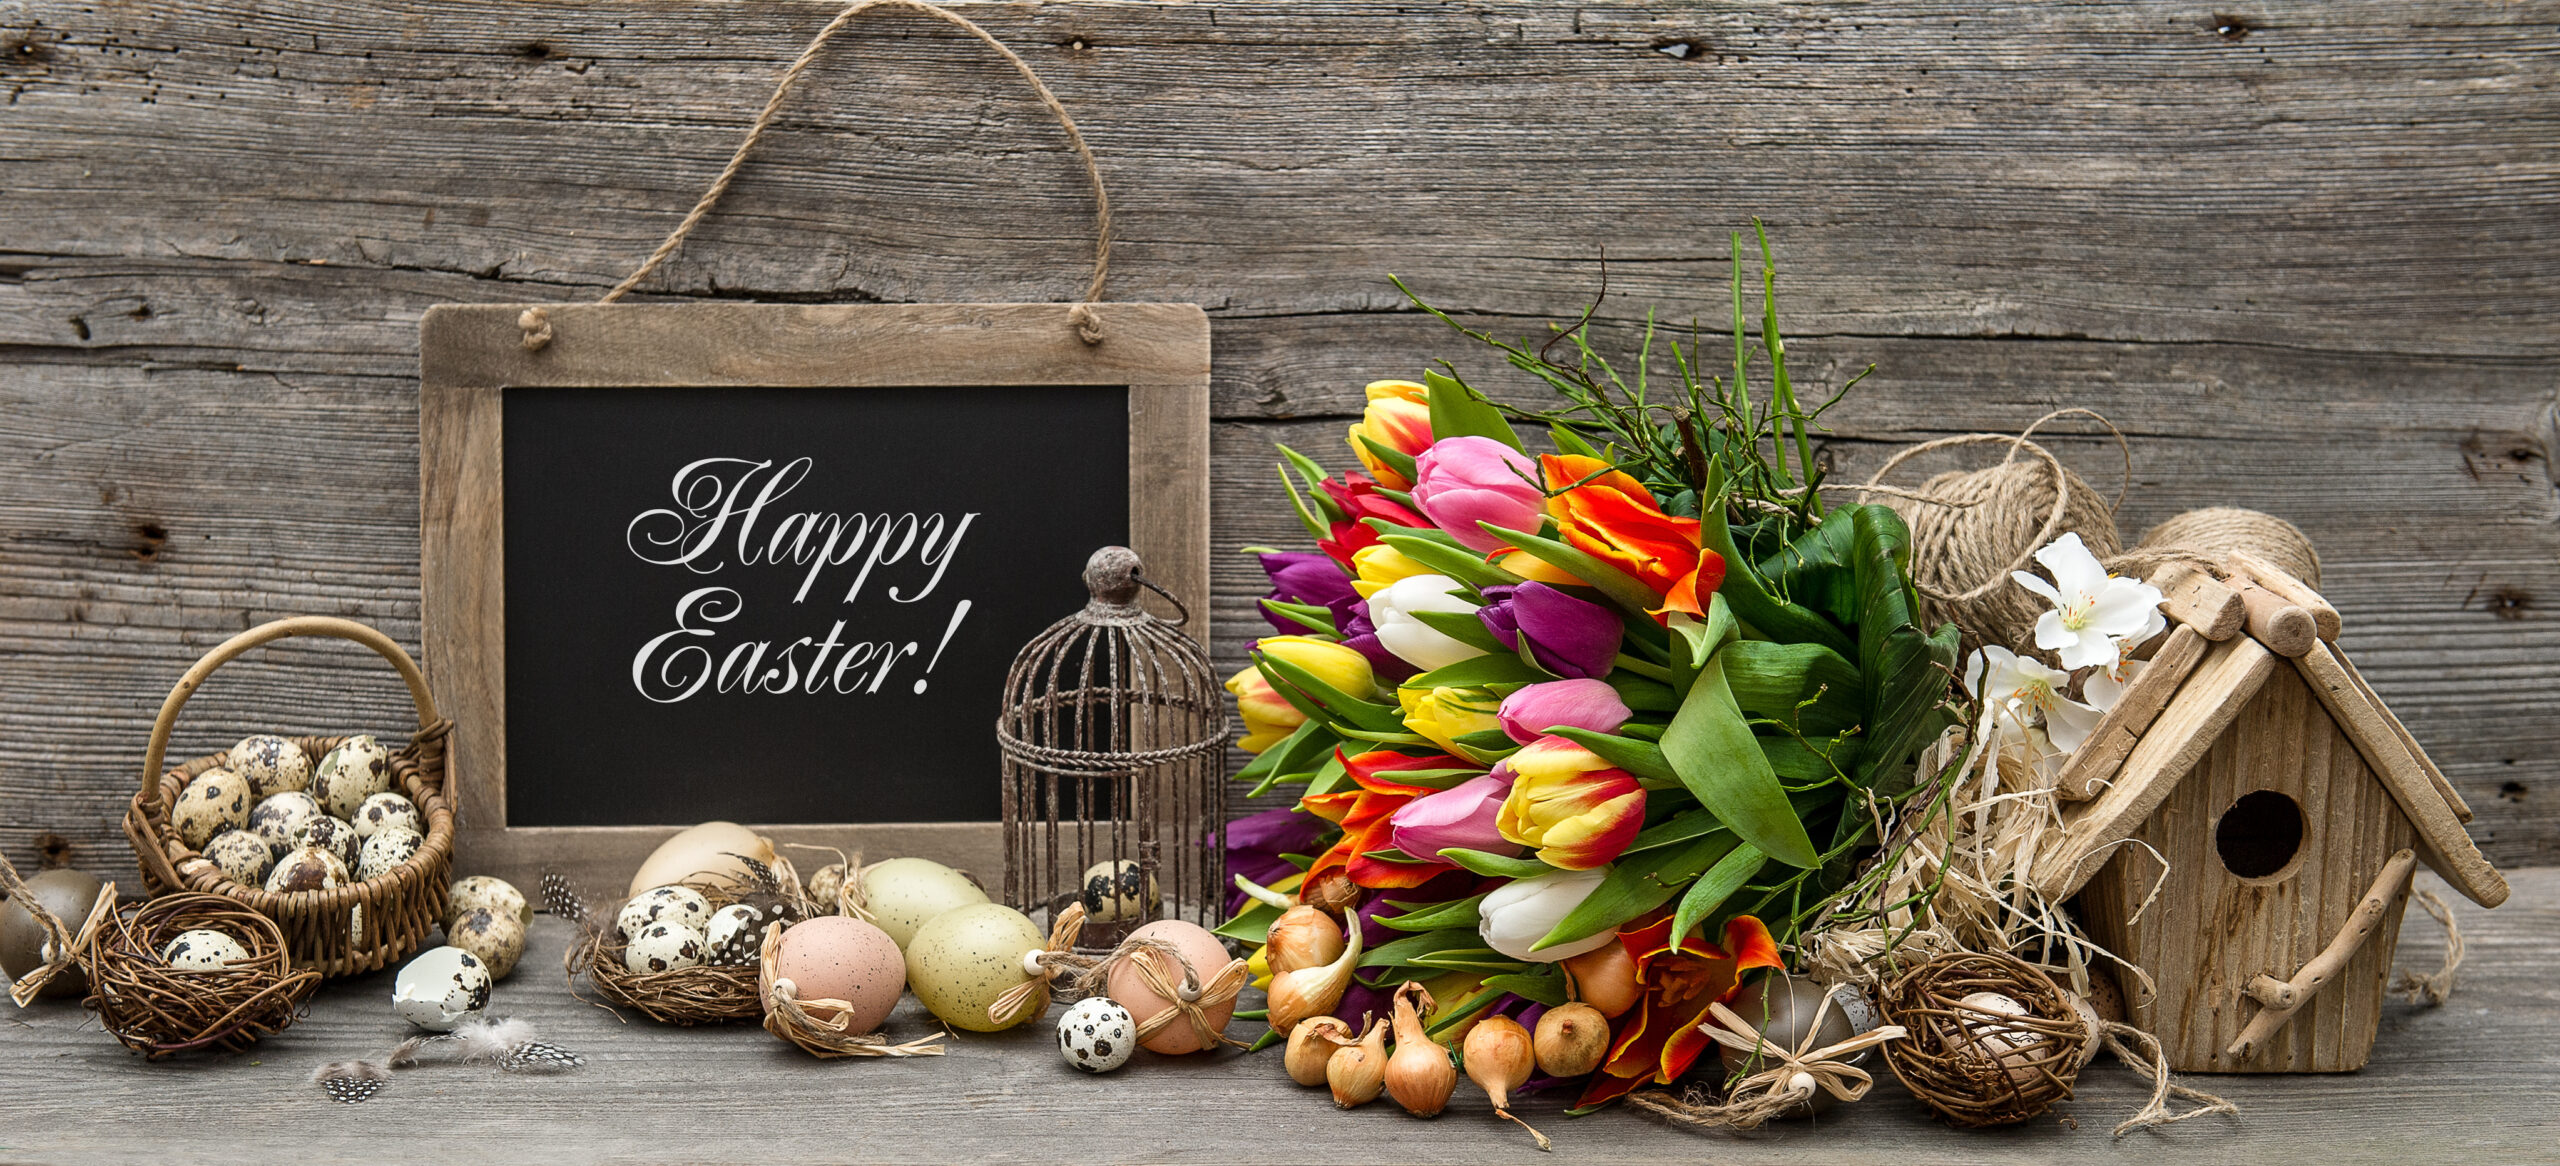 easter decoration with eggs and tulip flowers. vintage style background with sample text Happy Easter!